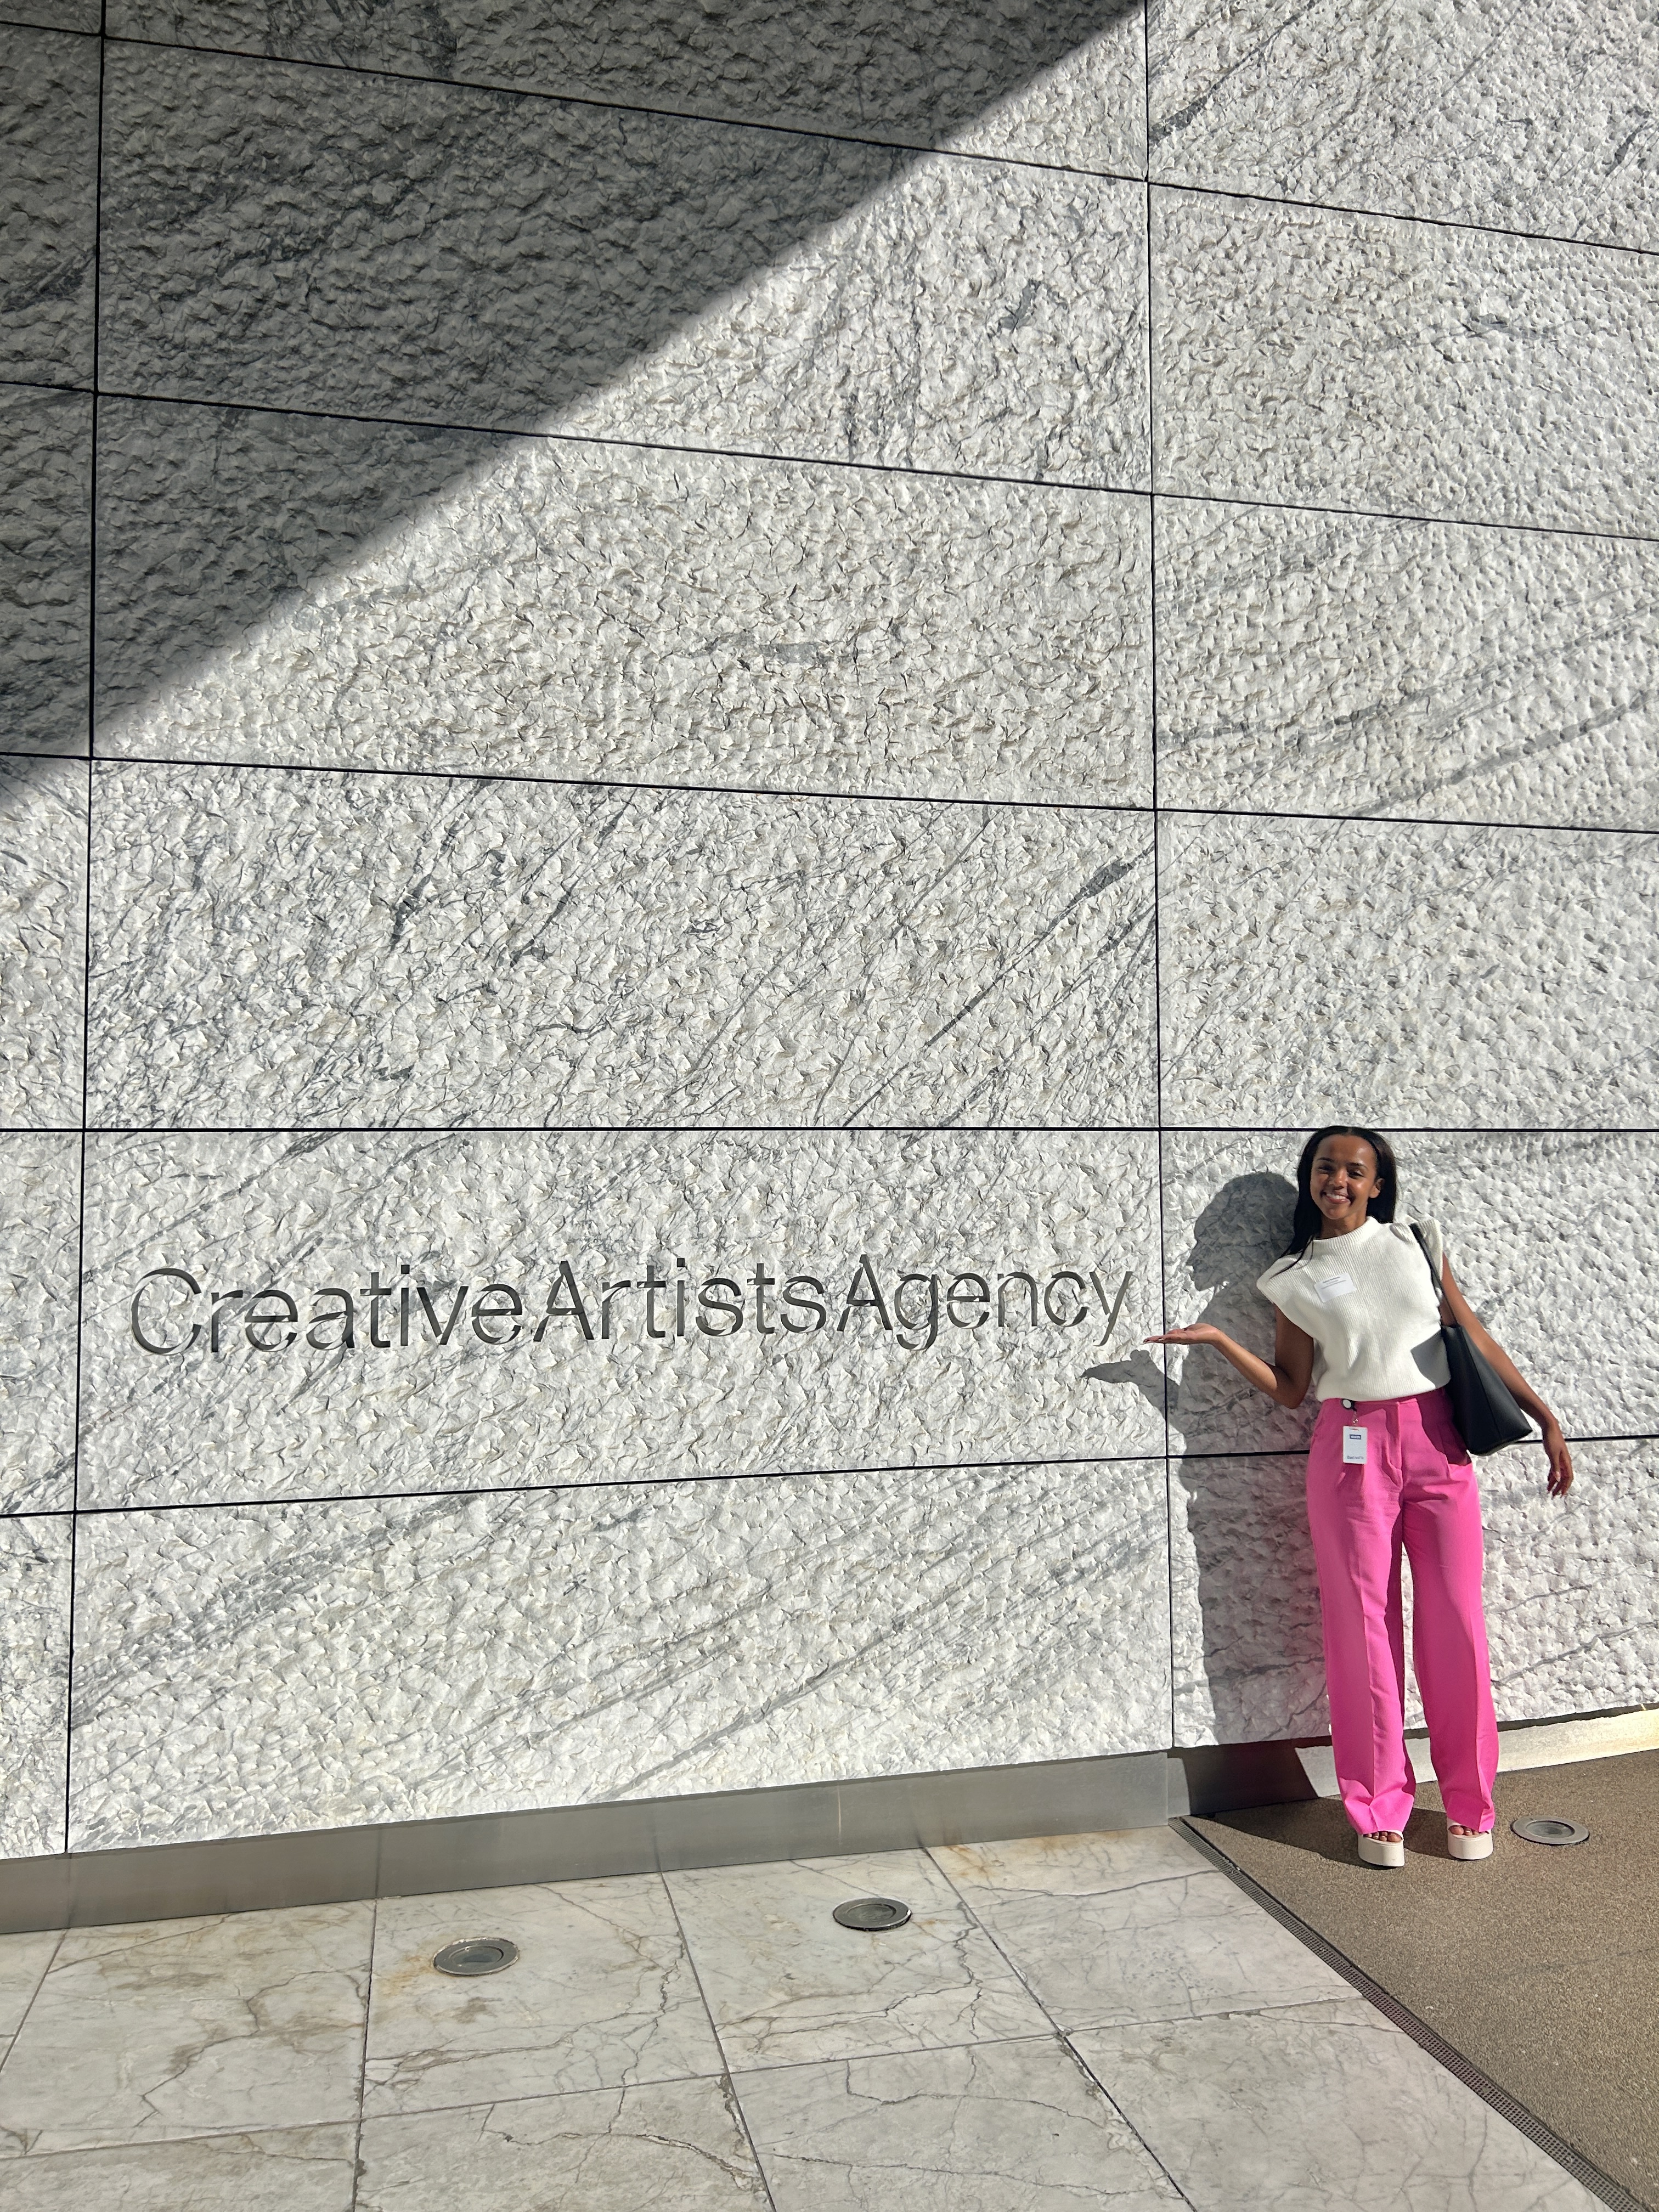 Photo of a person standing in front of the Creative Artists Agency